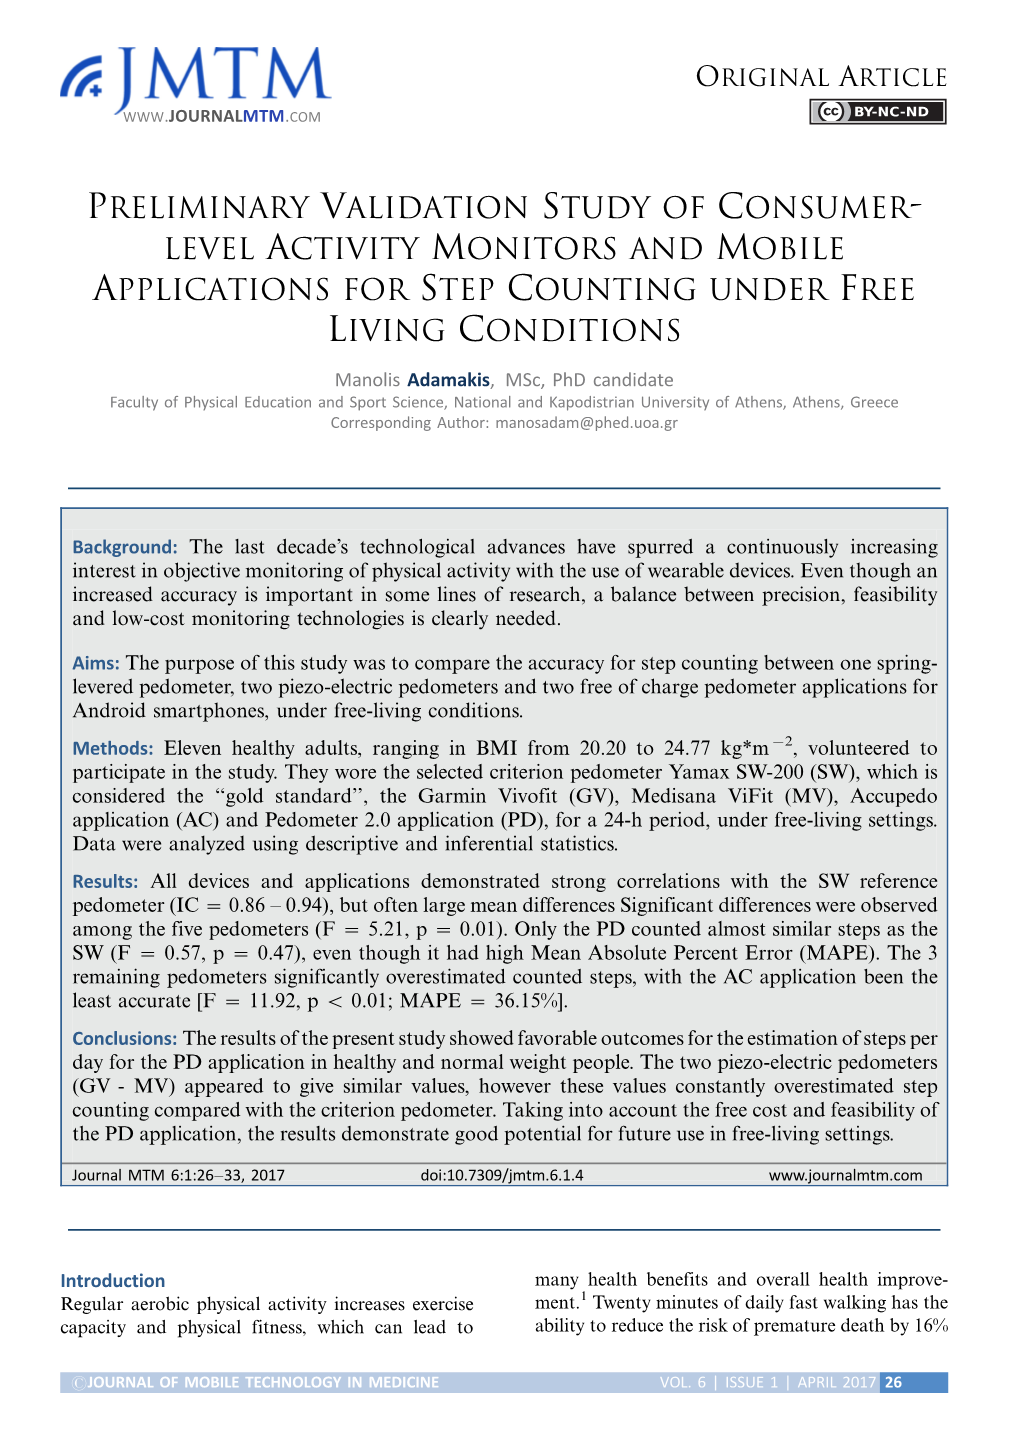 Preliminary Validation Study of Consumer-Level Activity Monitors and Mobile Applications for Step Counting Under Free Living Conditions